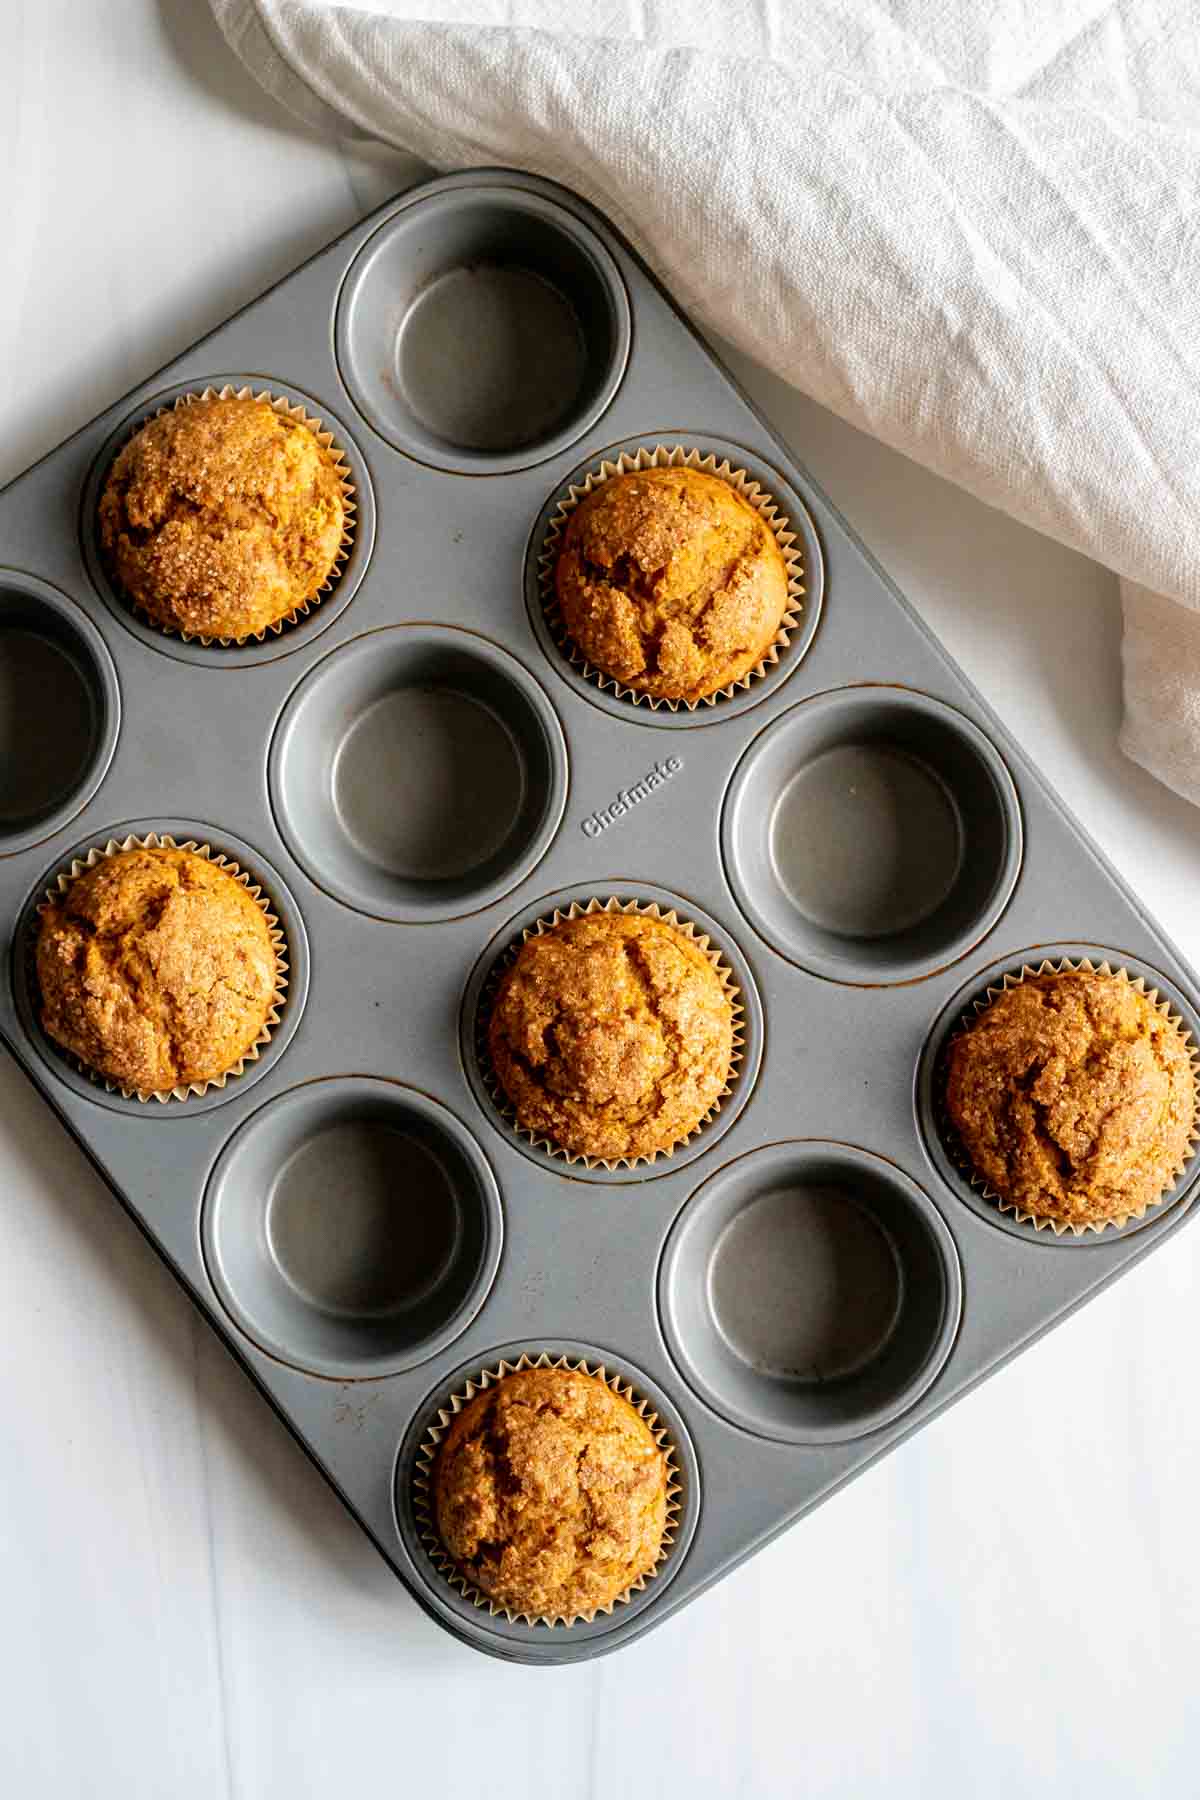 How to get the tallest muffins